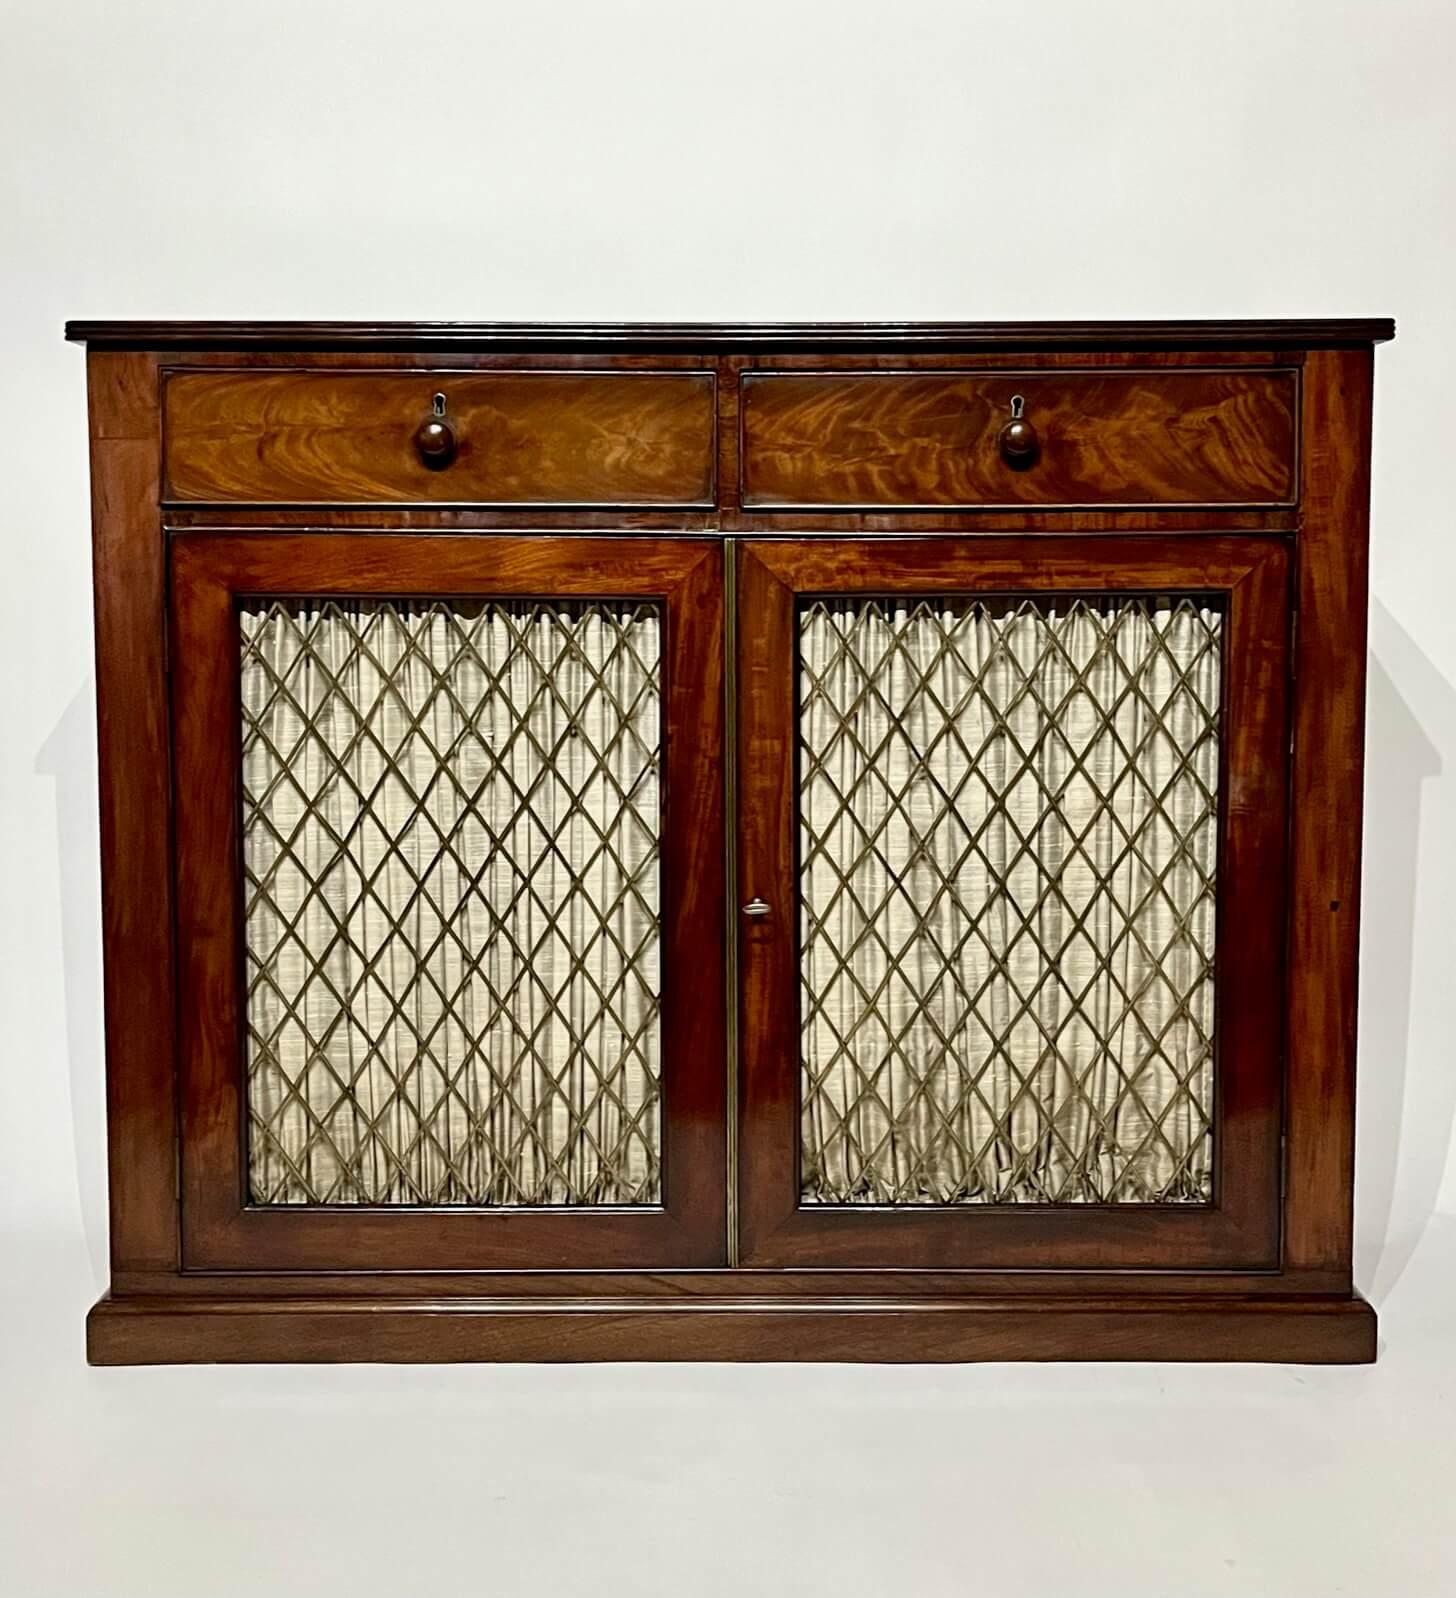 A beautiful circa 1820 English Regency period side cabinet, console cabinet, or low press of narrow rectangular form having exquisitely veneered mahogany case, the top with reeded edge above two locking drawers with original turned knob pulls